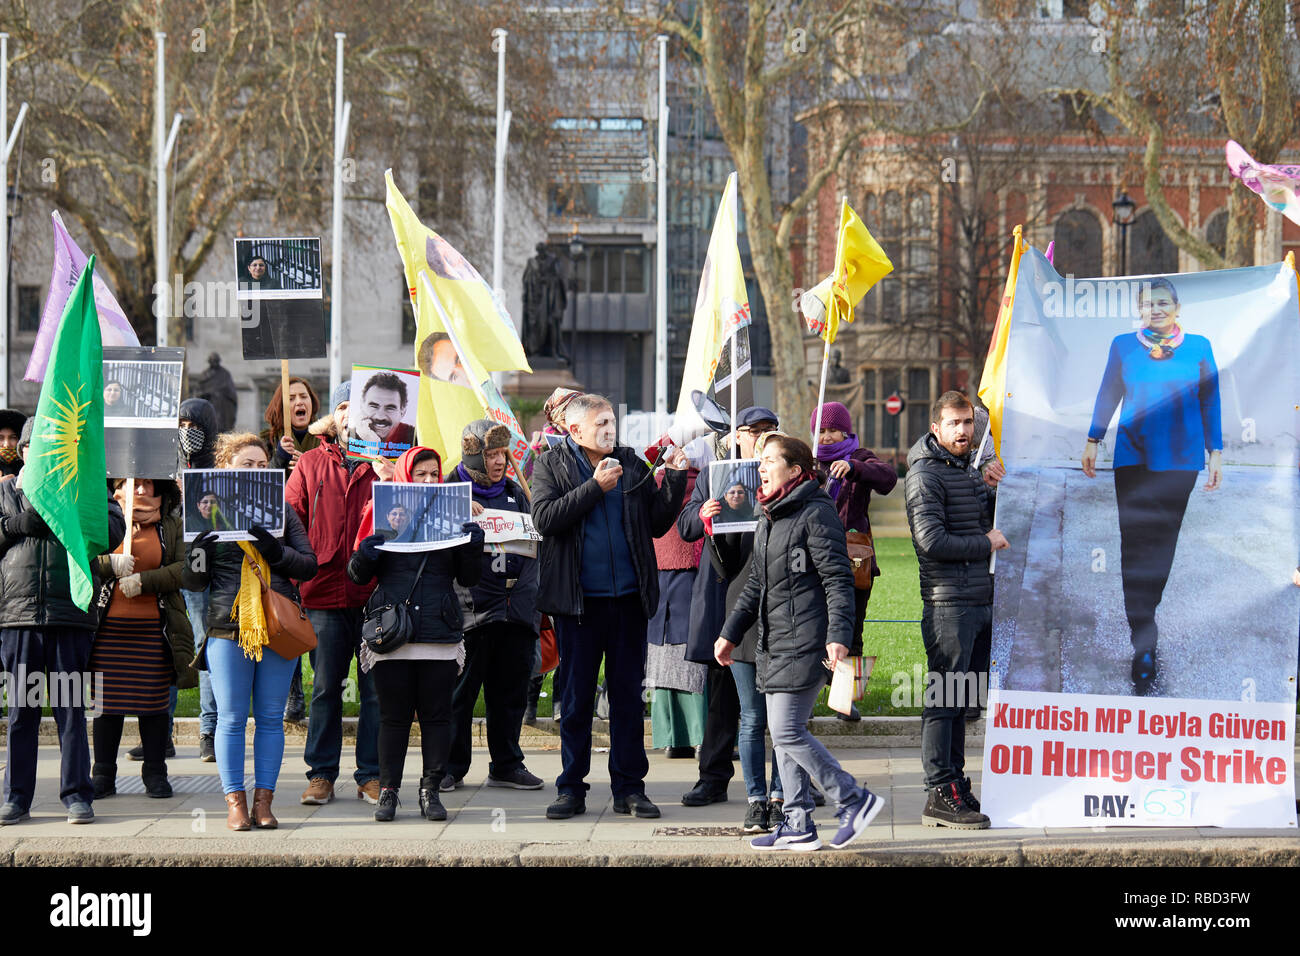 London, UK - January 9, 2019: Kurdish Protestors outside Parliament in support of MP Leyla Guven who has been on hunger strike since Nov 7 in support of Kurdish leader Abdullah Ocalan. Credit: Kevin J. Frost/Alamy Live News Stock Photo